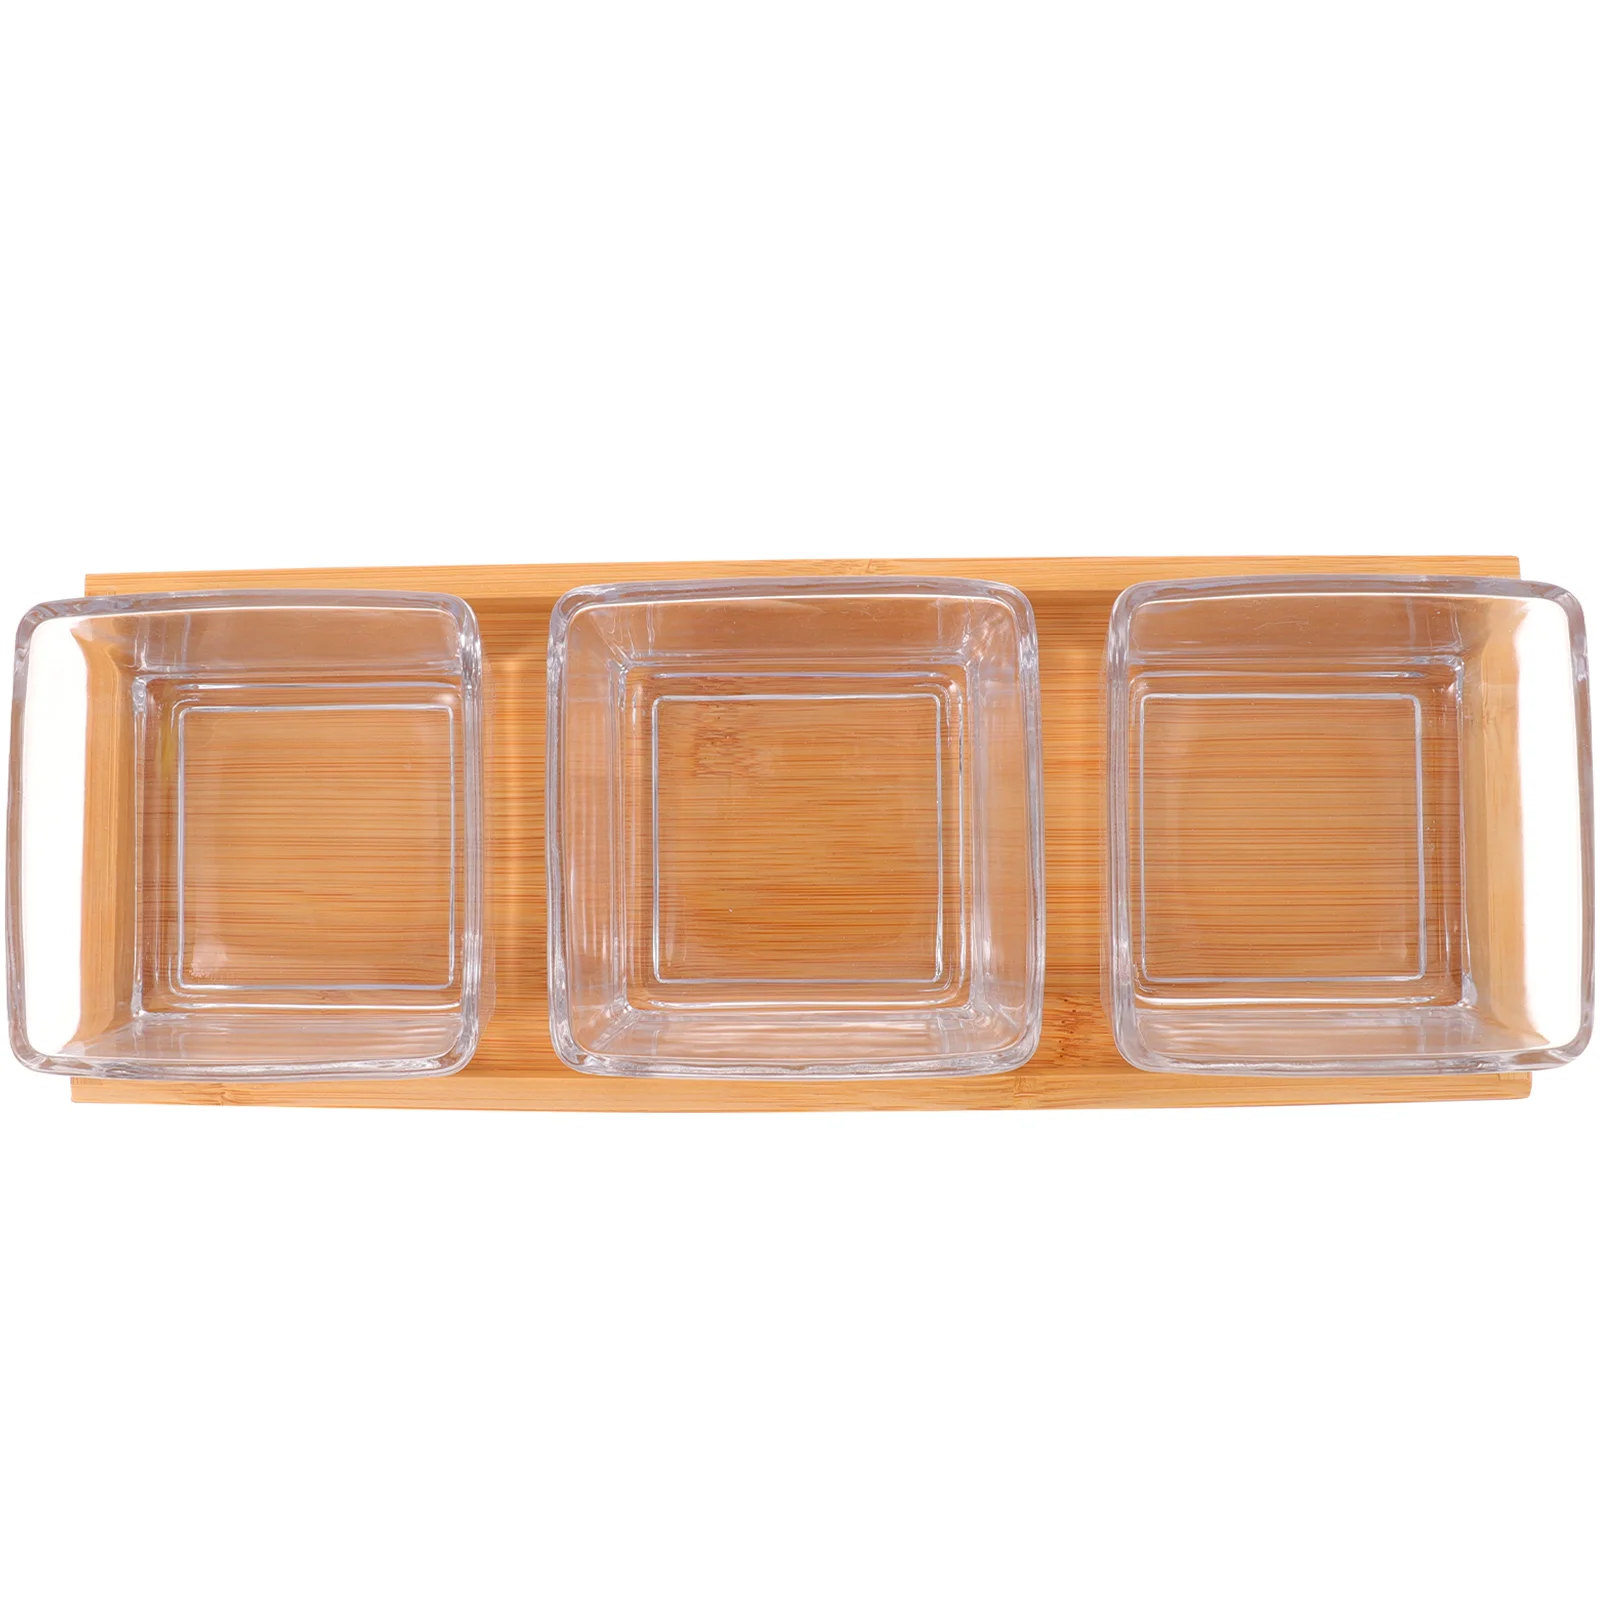 

Compartment Snack Plate Snacks Tray Candy Dish Glass Dessert Plates Home Food Container Terrarium Tank Dried Fruit Bowl